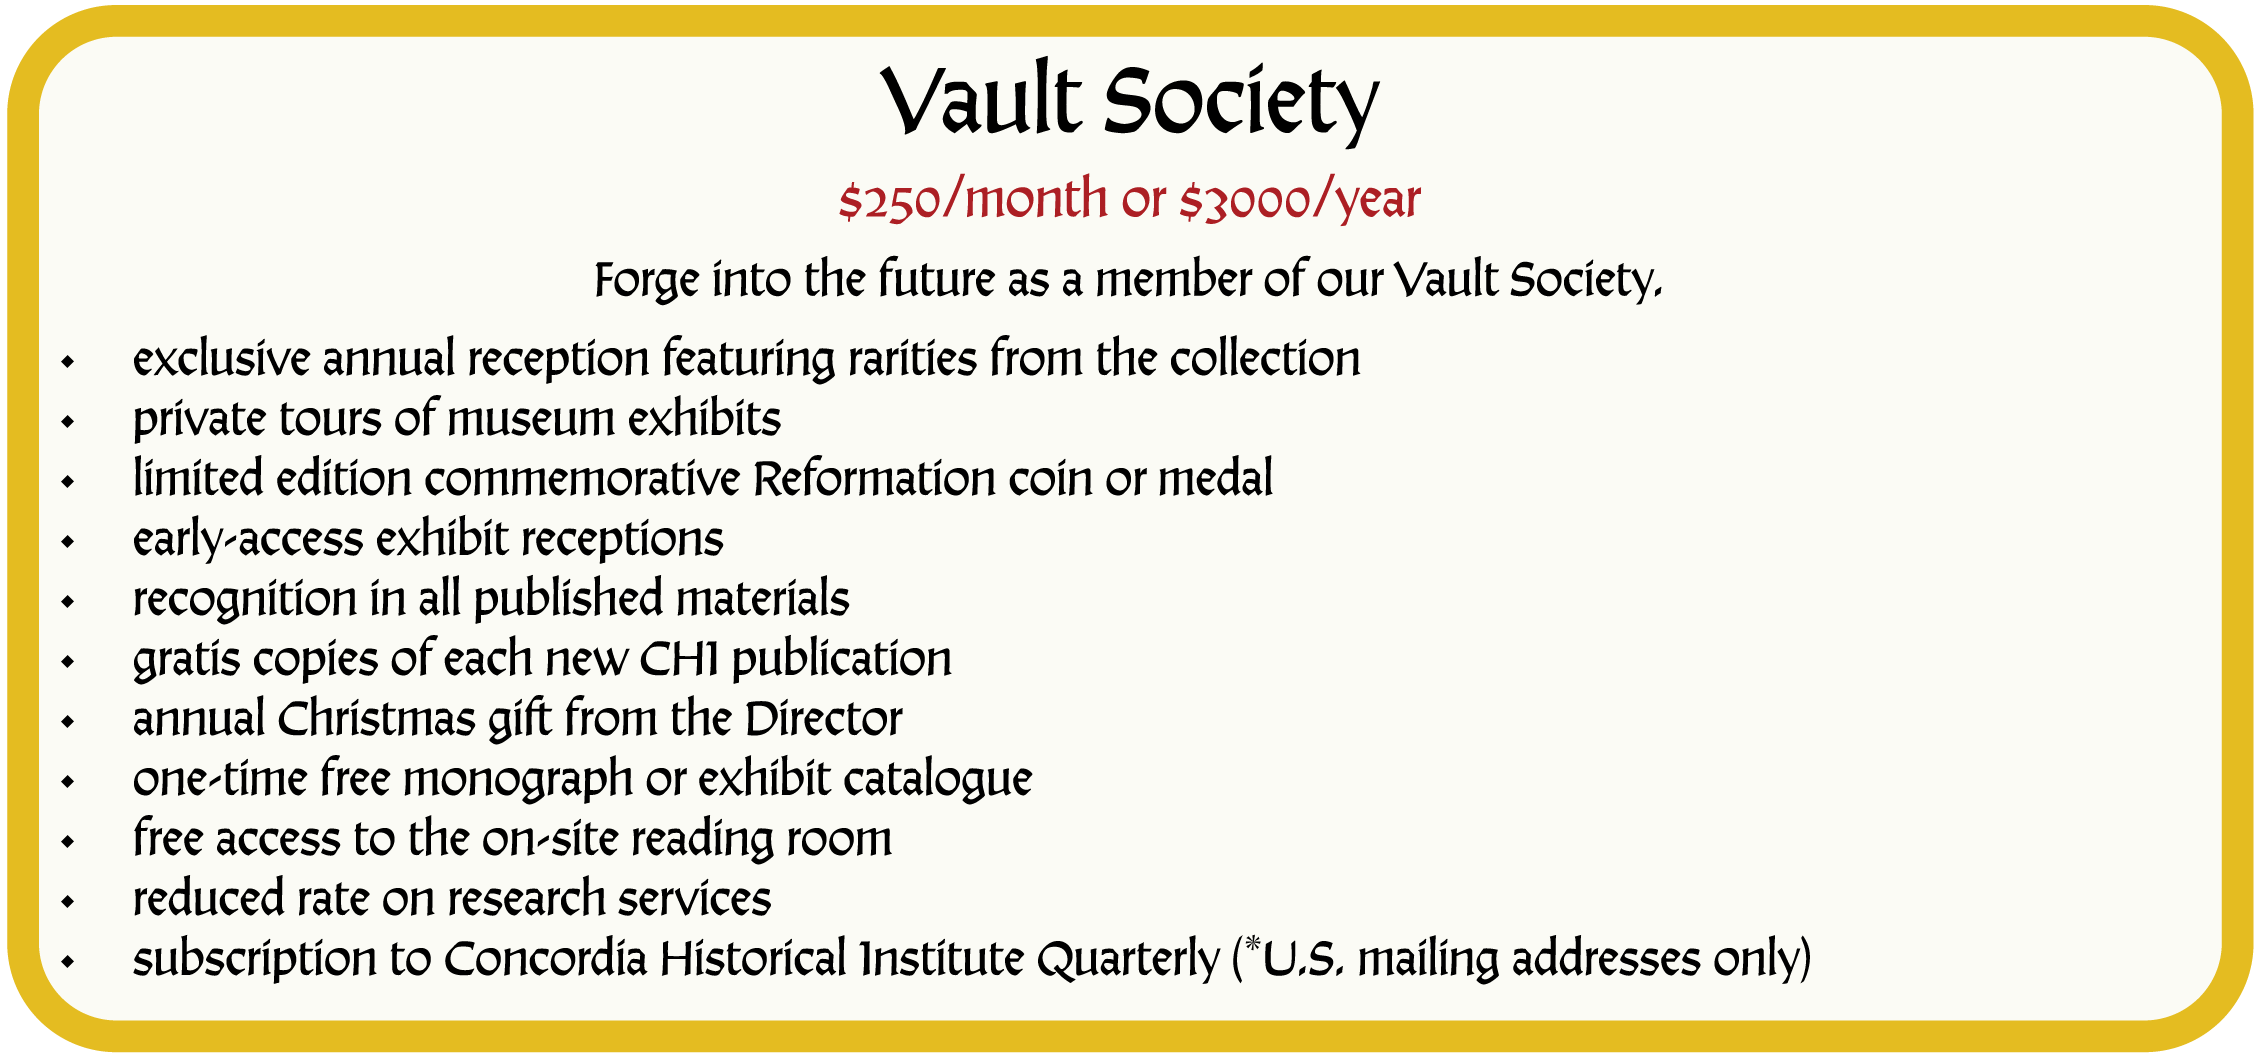 Vault Society. $250/month or $3000/year. Forge into the future as a member of our Vault Society. Membership in the Vault Society includes the following benefits: exclusive annual reception featuring rarities from the collection; private tours of museum exhibits; limited edition commemorative Reformation coin or medal; early-access exhibit receptions; recognition in all published materials; gratis copies of each new CHI publication; annual Christmas gift from the Director; one-time free monograph or exhibit catalogue; free access to the on-site reading room; reduced rate on research services; subscription to Concordia Historical Institute Quarterly (*U.S. mailing addresses only)